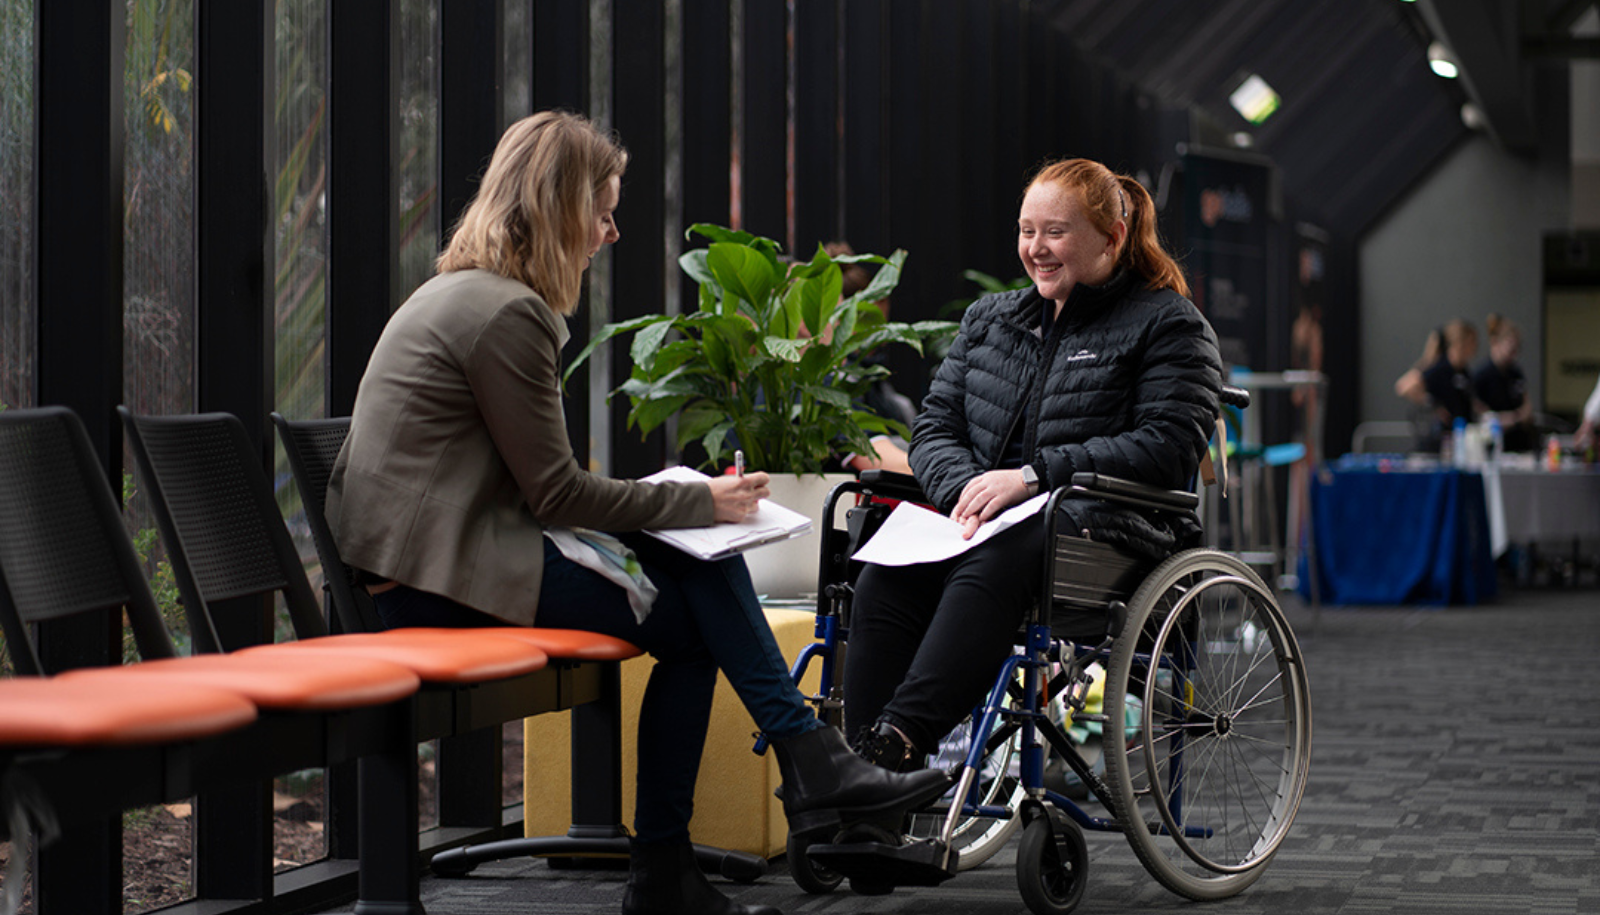 Two women having a conversation at the GOTAFE campus